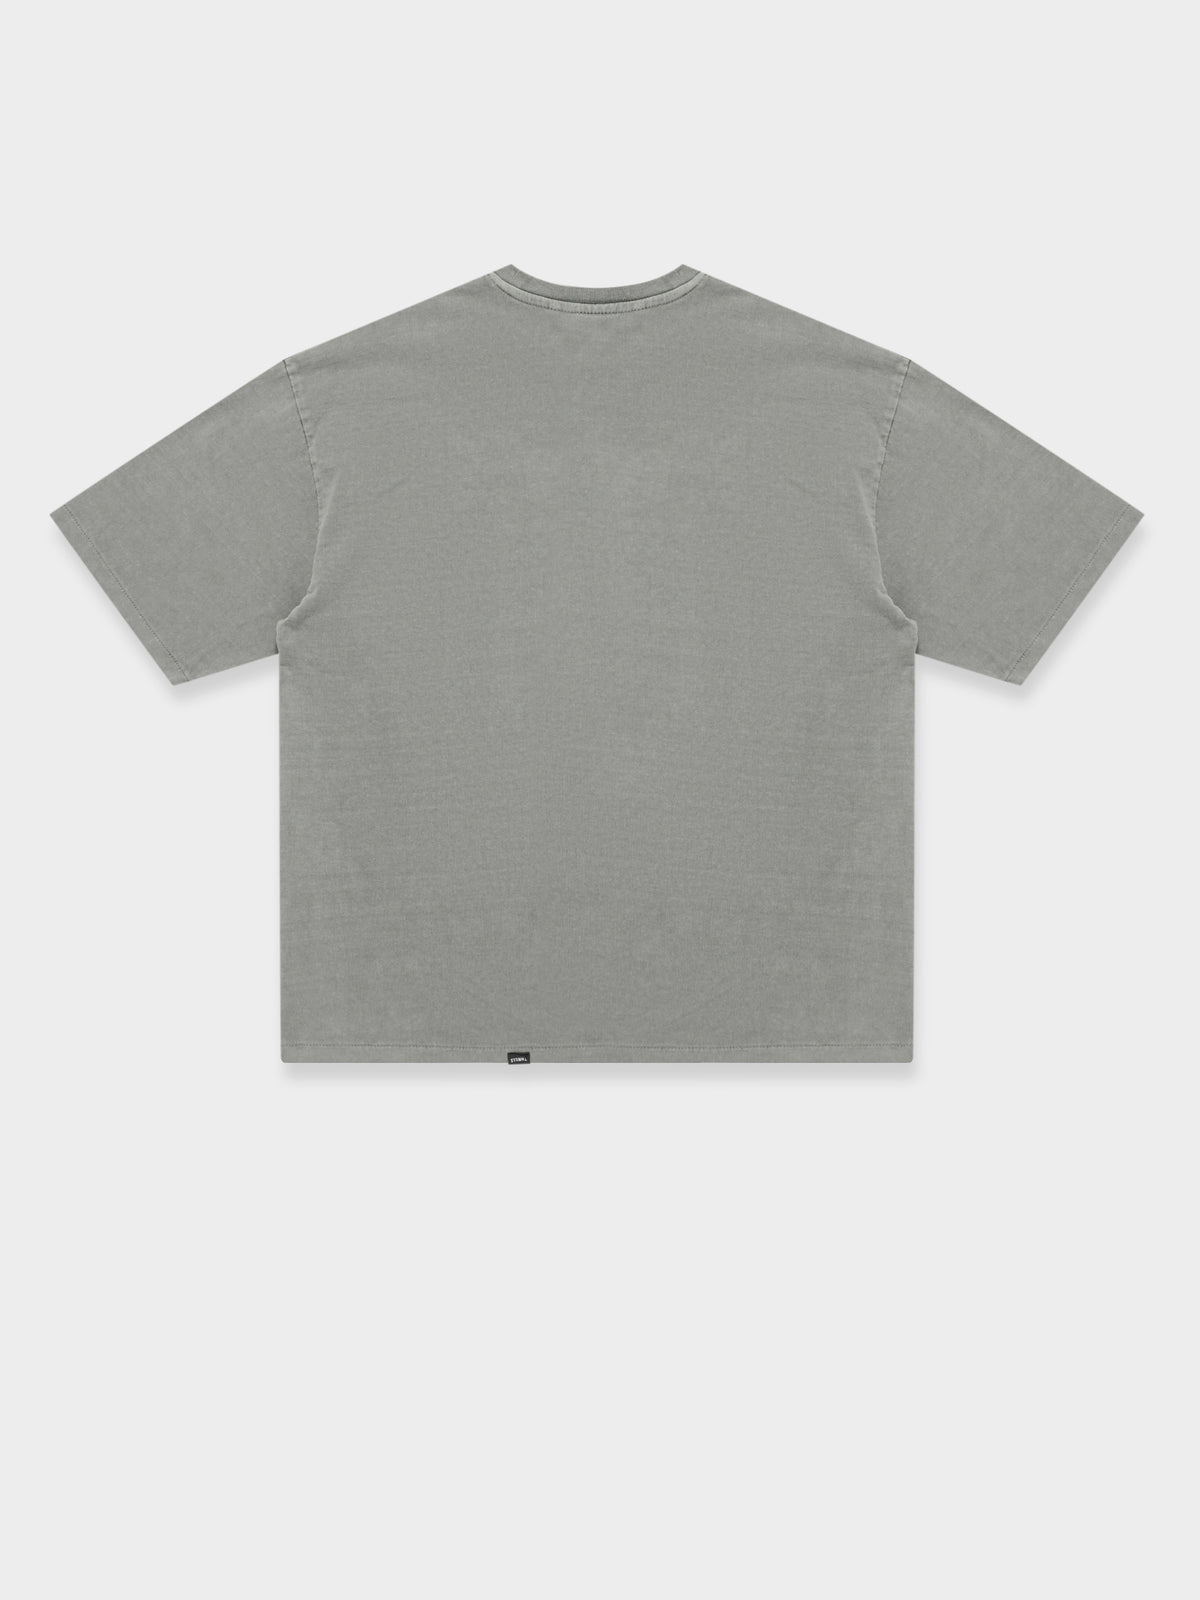 State of Being T-Shirt in Washed Grey